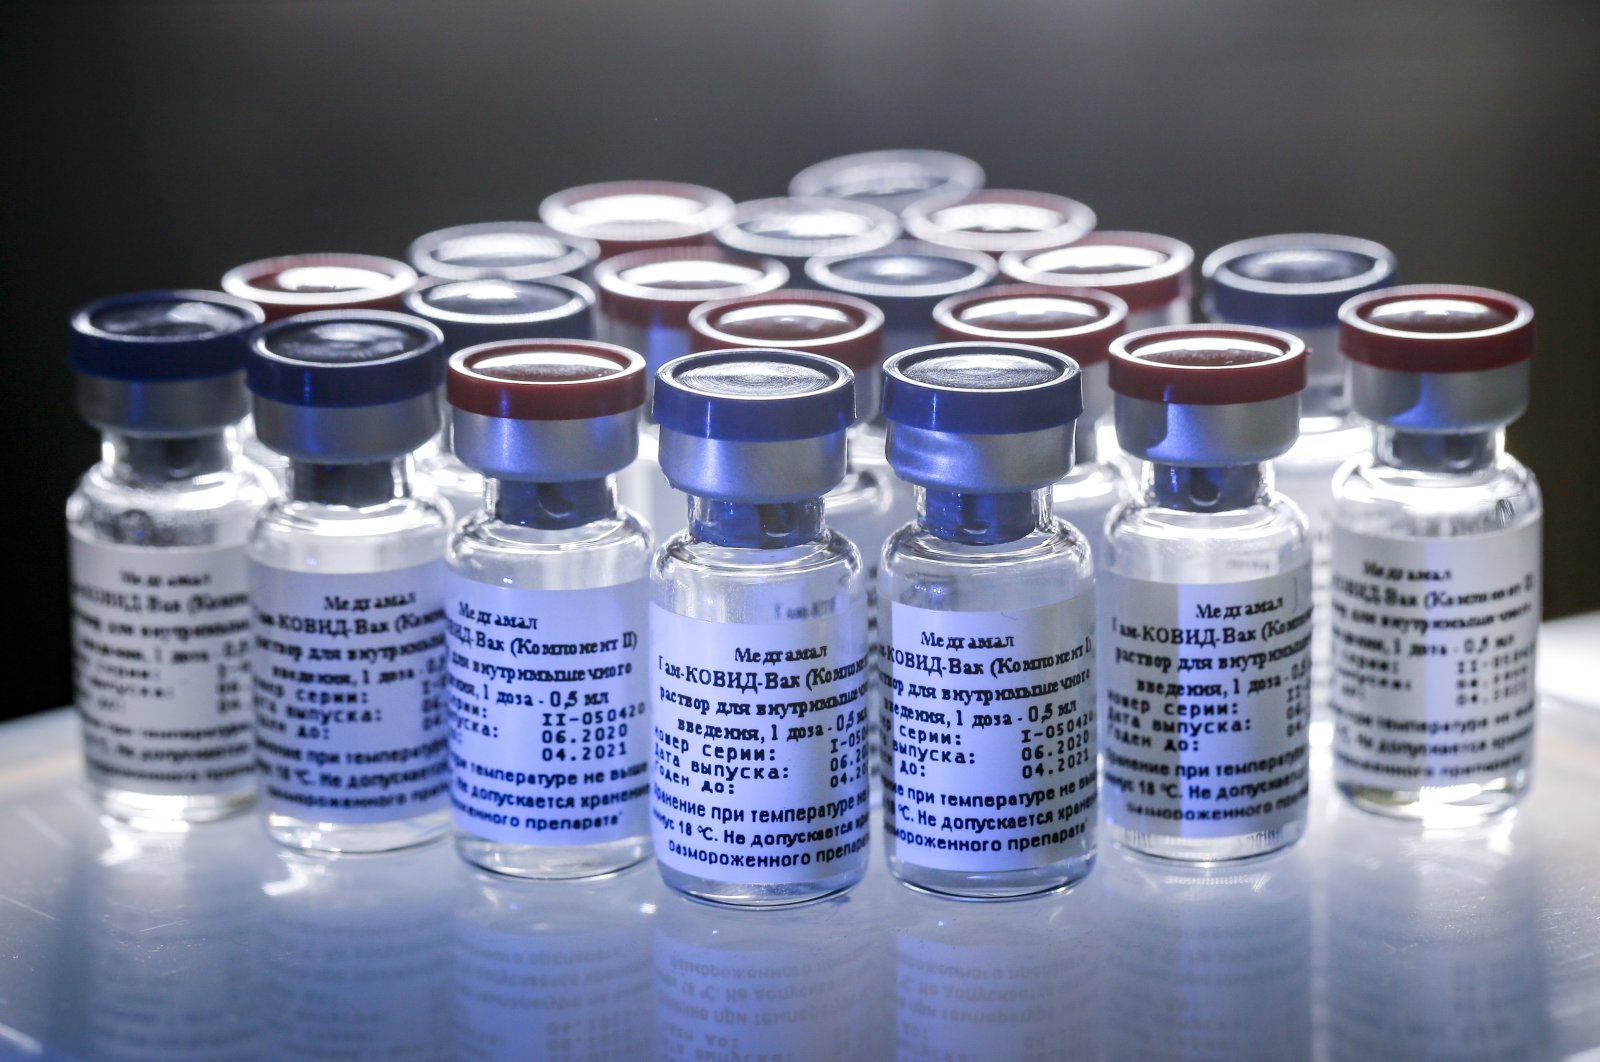 A new vaccine is on display at the Nikolai Gamaleya National Center of Epidemiology and Microbiology in Moscow, Russia, Aug. 6, 2020. (AP Photo)